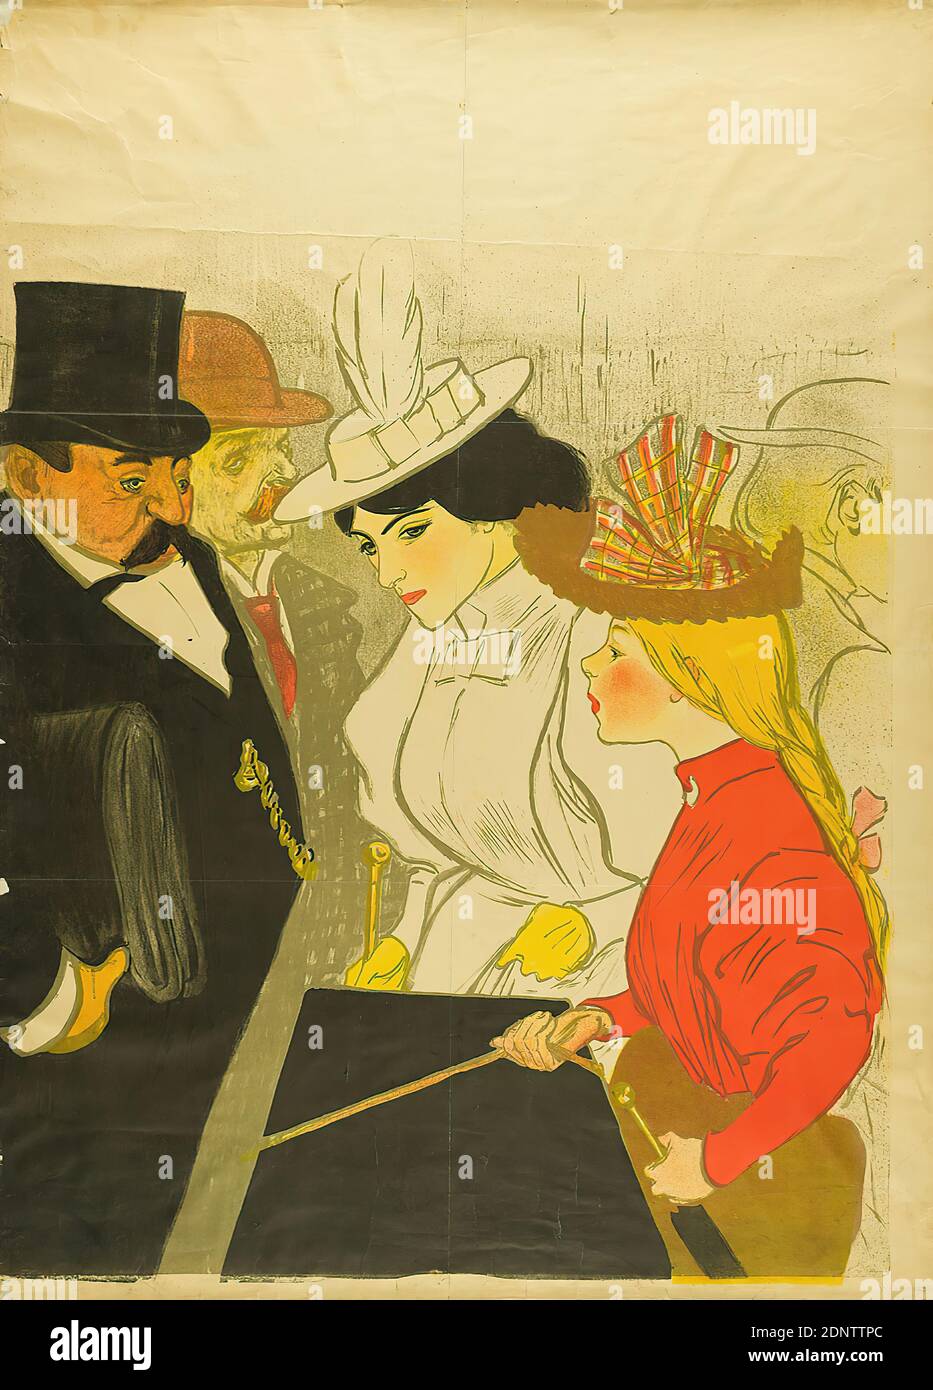 Théophile-Alexandre Steinlen, Imprimerie Charles Verneau, Affiches Charles Verneau La Rue, Paper, Lithograph, Total: Height: 139 cm; Width: 102 cm, signed and dated: on one of the six parts at lower right in print: Steinlen 96, Product and business advertising (posters), Politics/Social/current affairs (posters), urban life, fashion, woman, Fashionable, elegant woman, 'Belle', young woman, girl, man, top hat Stock Photo